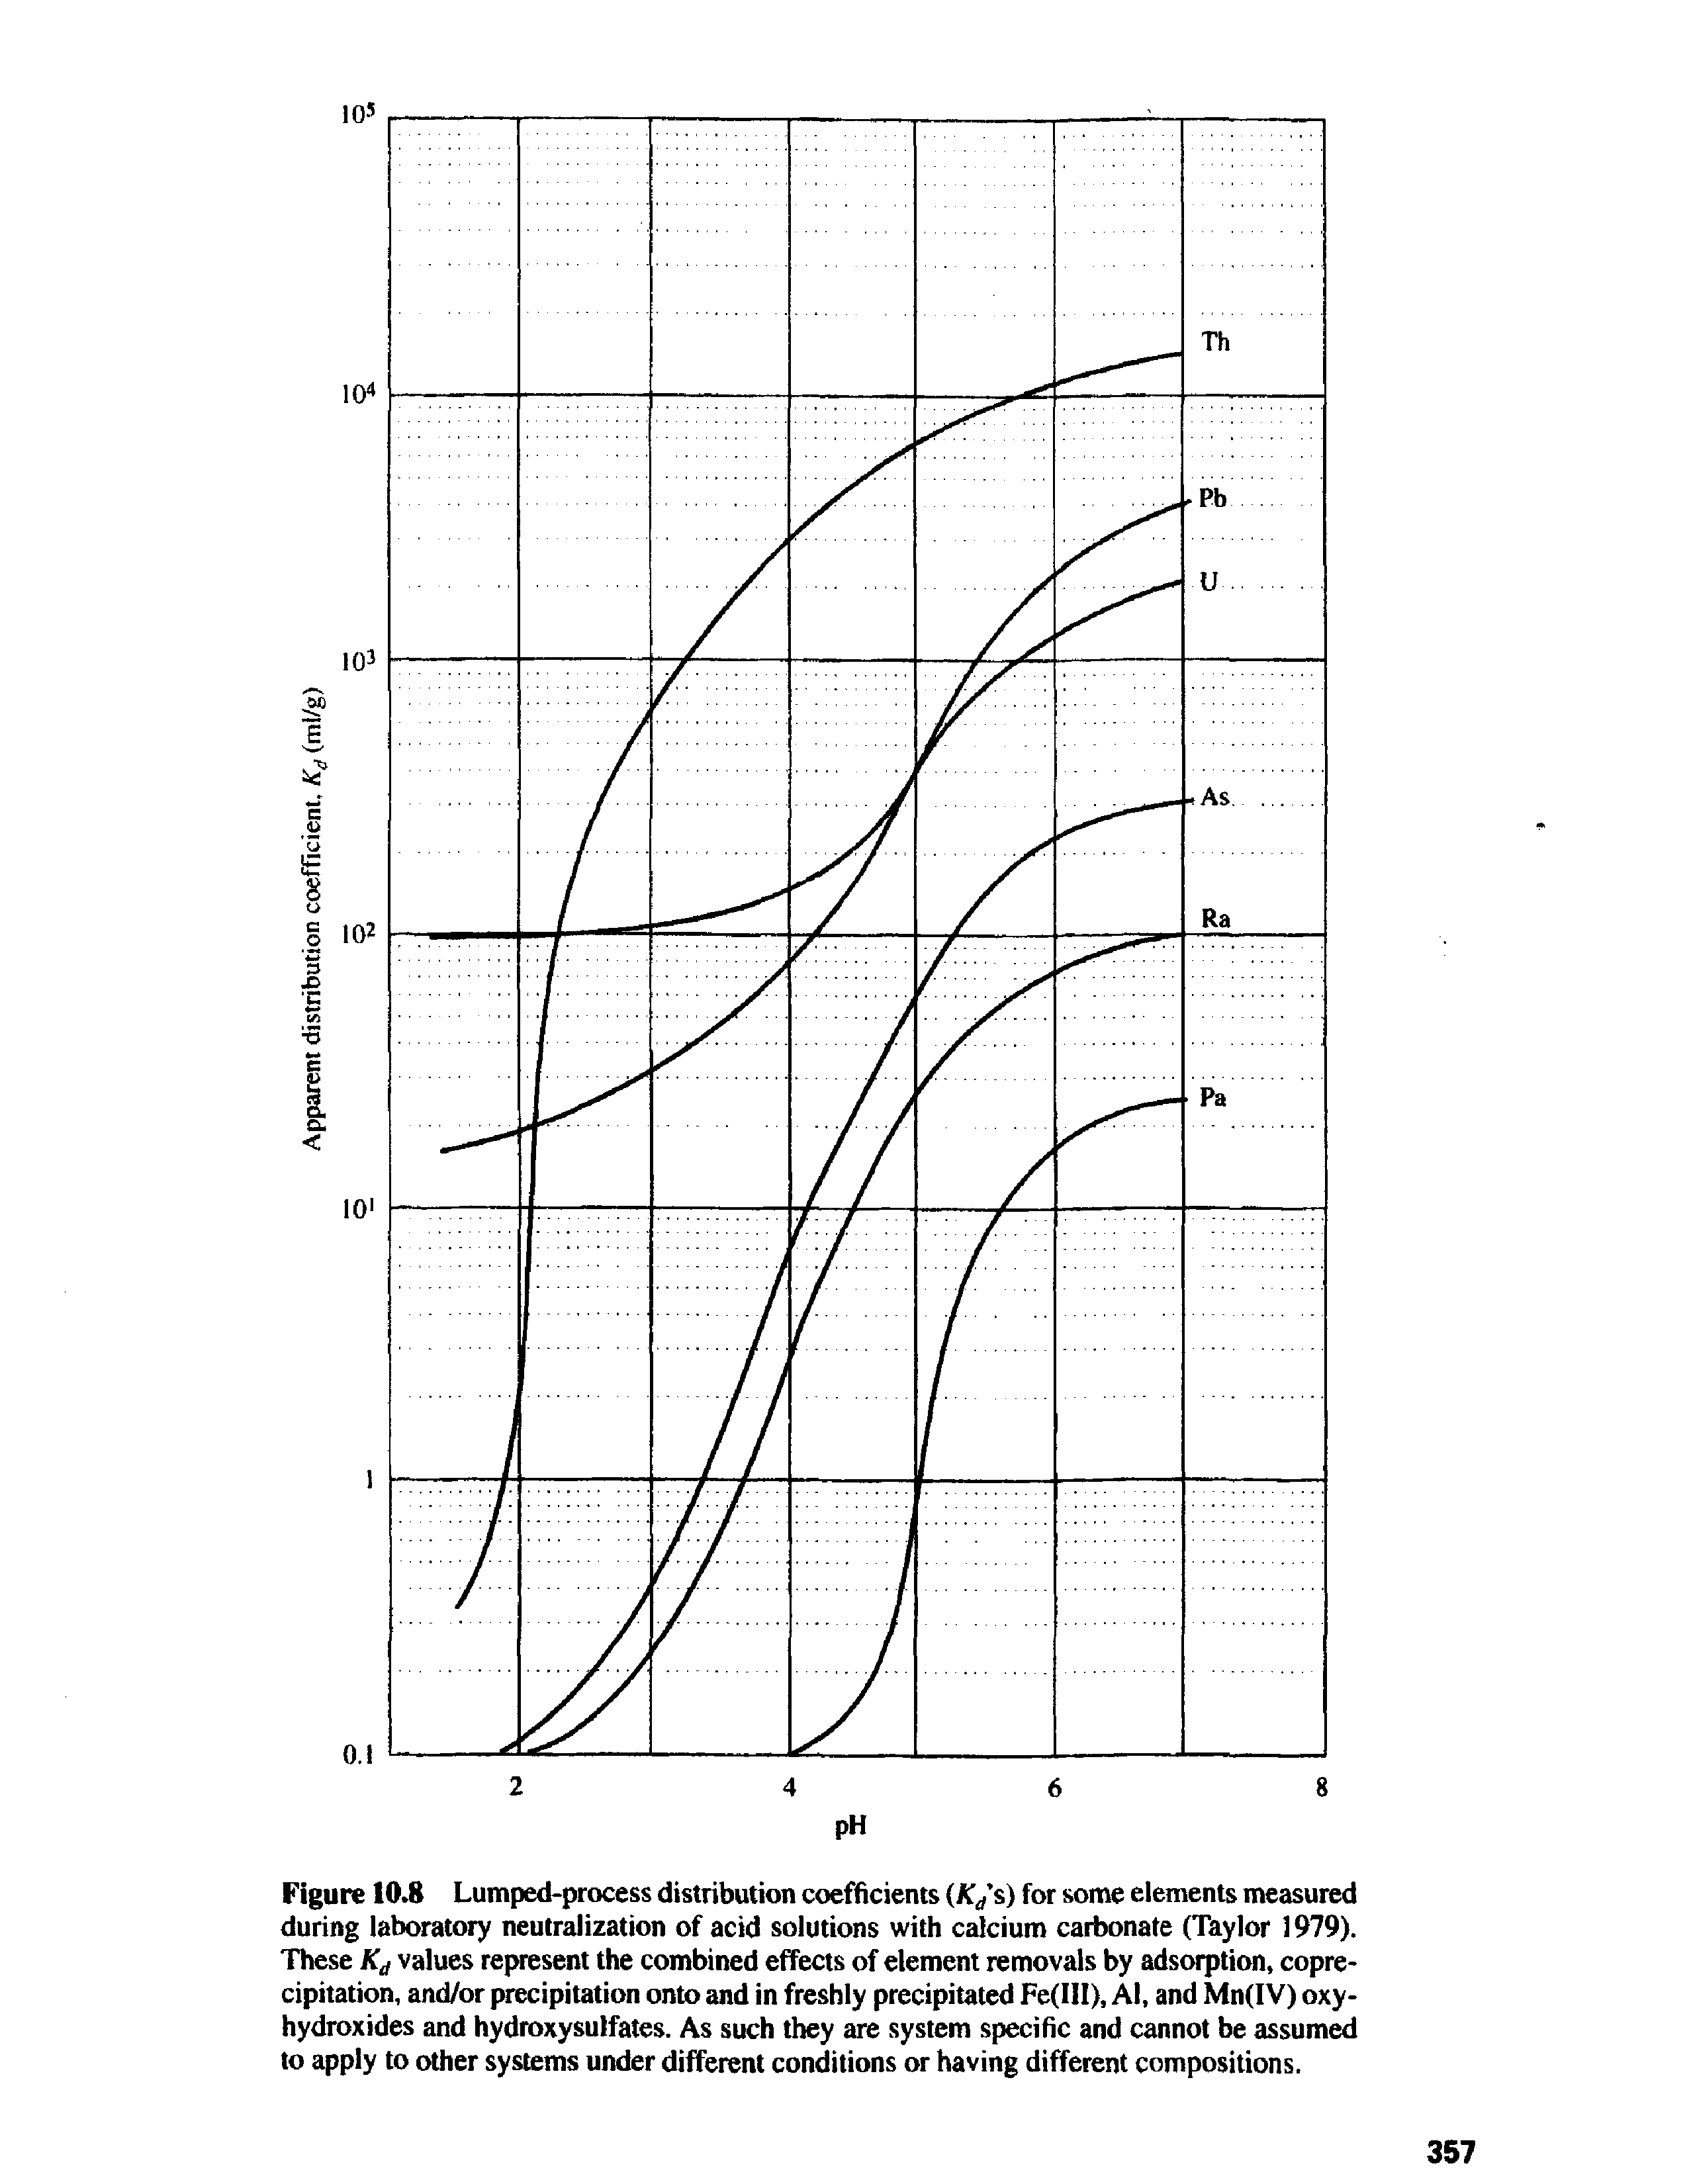 Figure 10.8 Lumped-process distribution coefficients (/T/s) for some elements measured during laboratory neutralization of acid solutions with calcium carbonate (Taylor 1979). These values represent the combined effects of element removals by adsorption, coprecipitation, and/or precipitation onto and in freshly precipitated Fe(IlI), Al, and Mn(IV) oxy-hydroxides and hydroxysutfates. As such they are system specific and cannot be assumed to apply to other systems under different conditions or having different compositions.